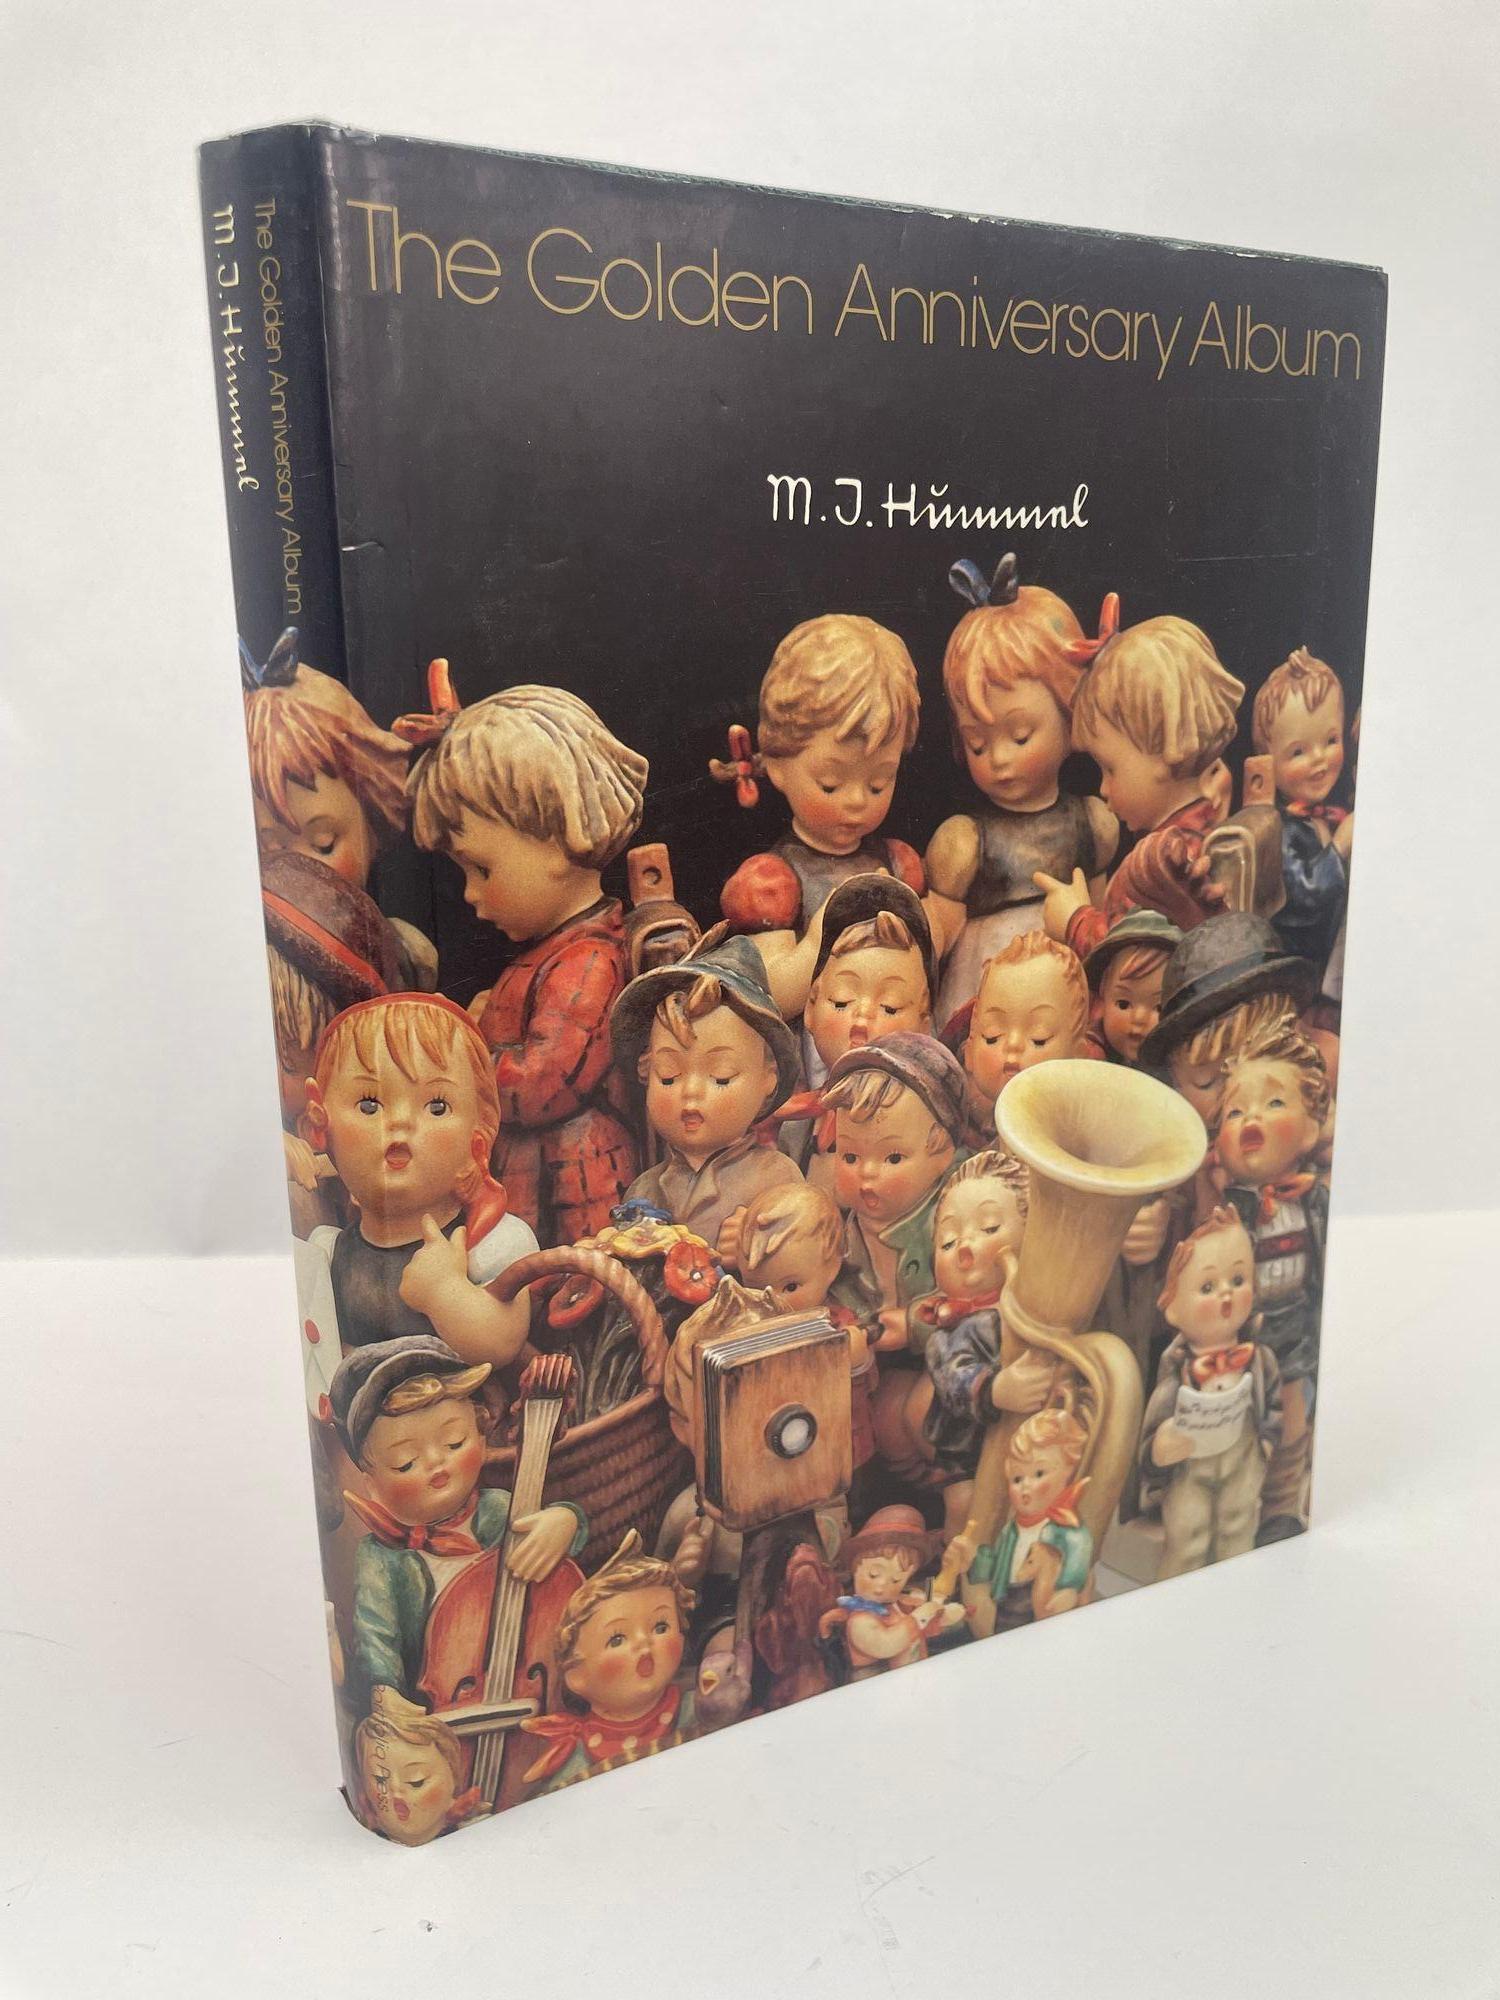 
M.I. Hummel: The Golden Anniversary Album Hardcover – January 1, 1984.
by Eric W. Ehrmann (Author), Robert L. Miller (Author), M.I. Hummel (Illustrator)
1st edition, 1st printing.
This beautiful book highlights in pictures and words 50 years of